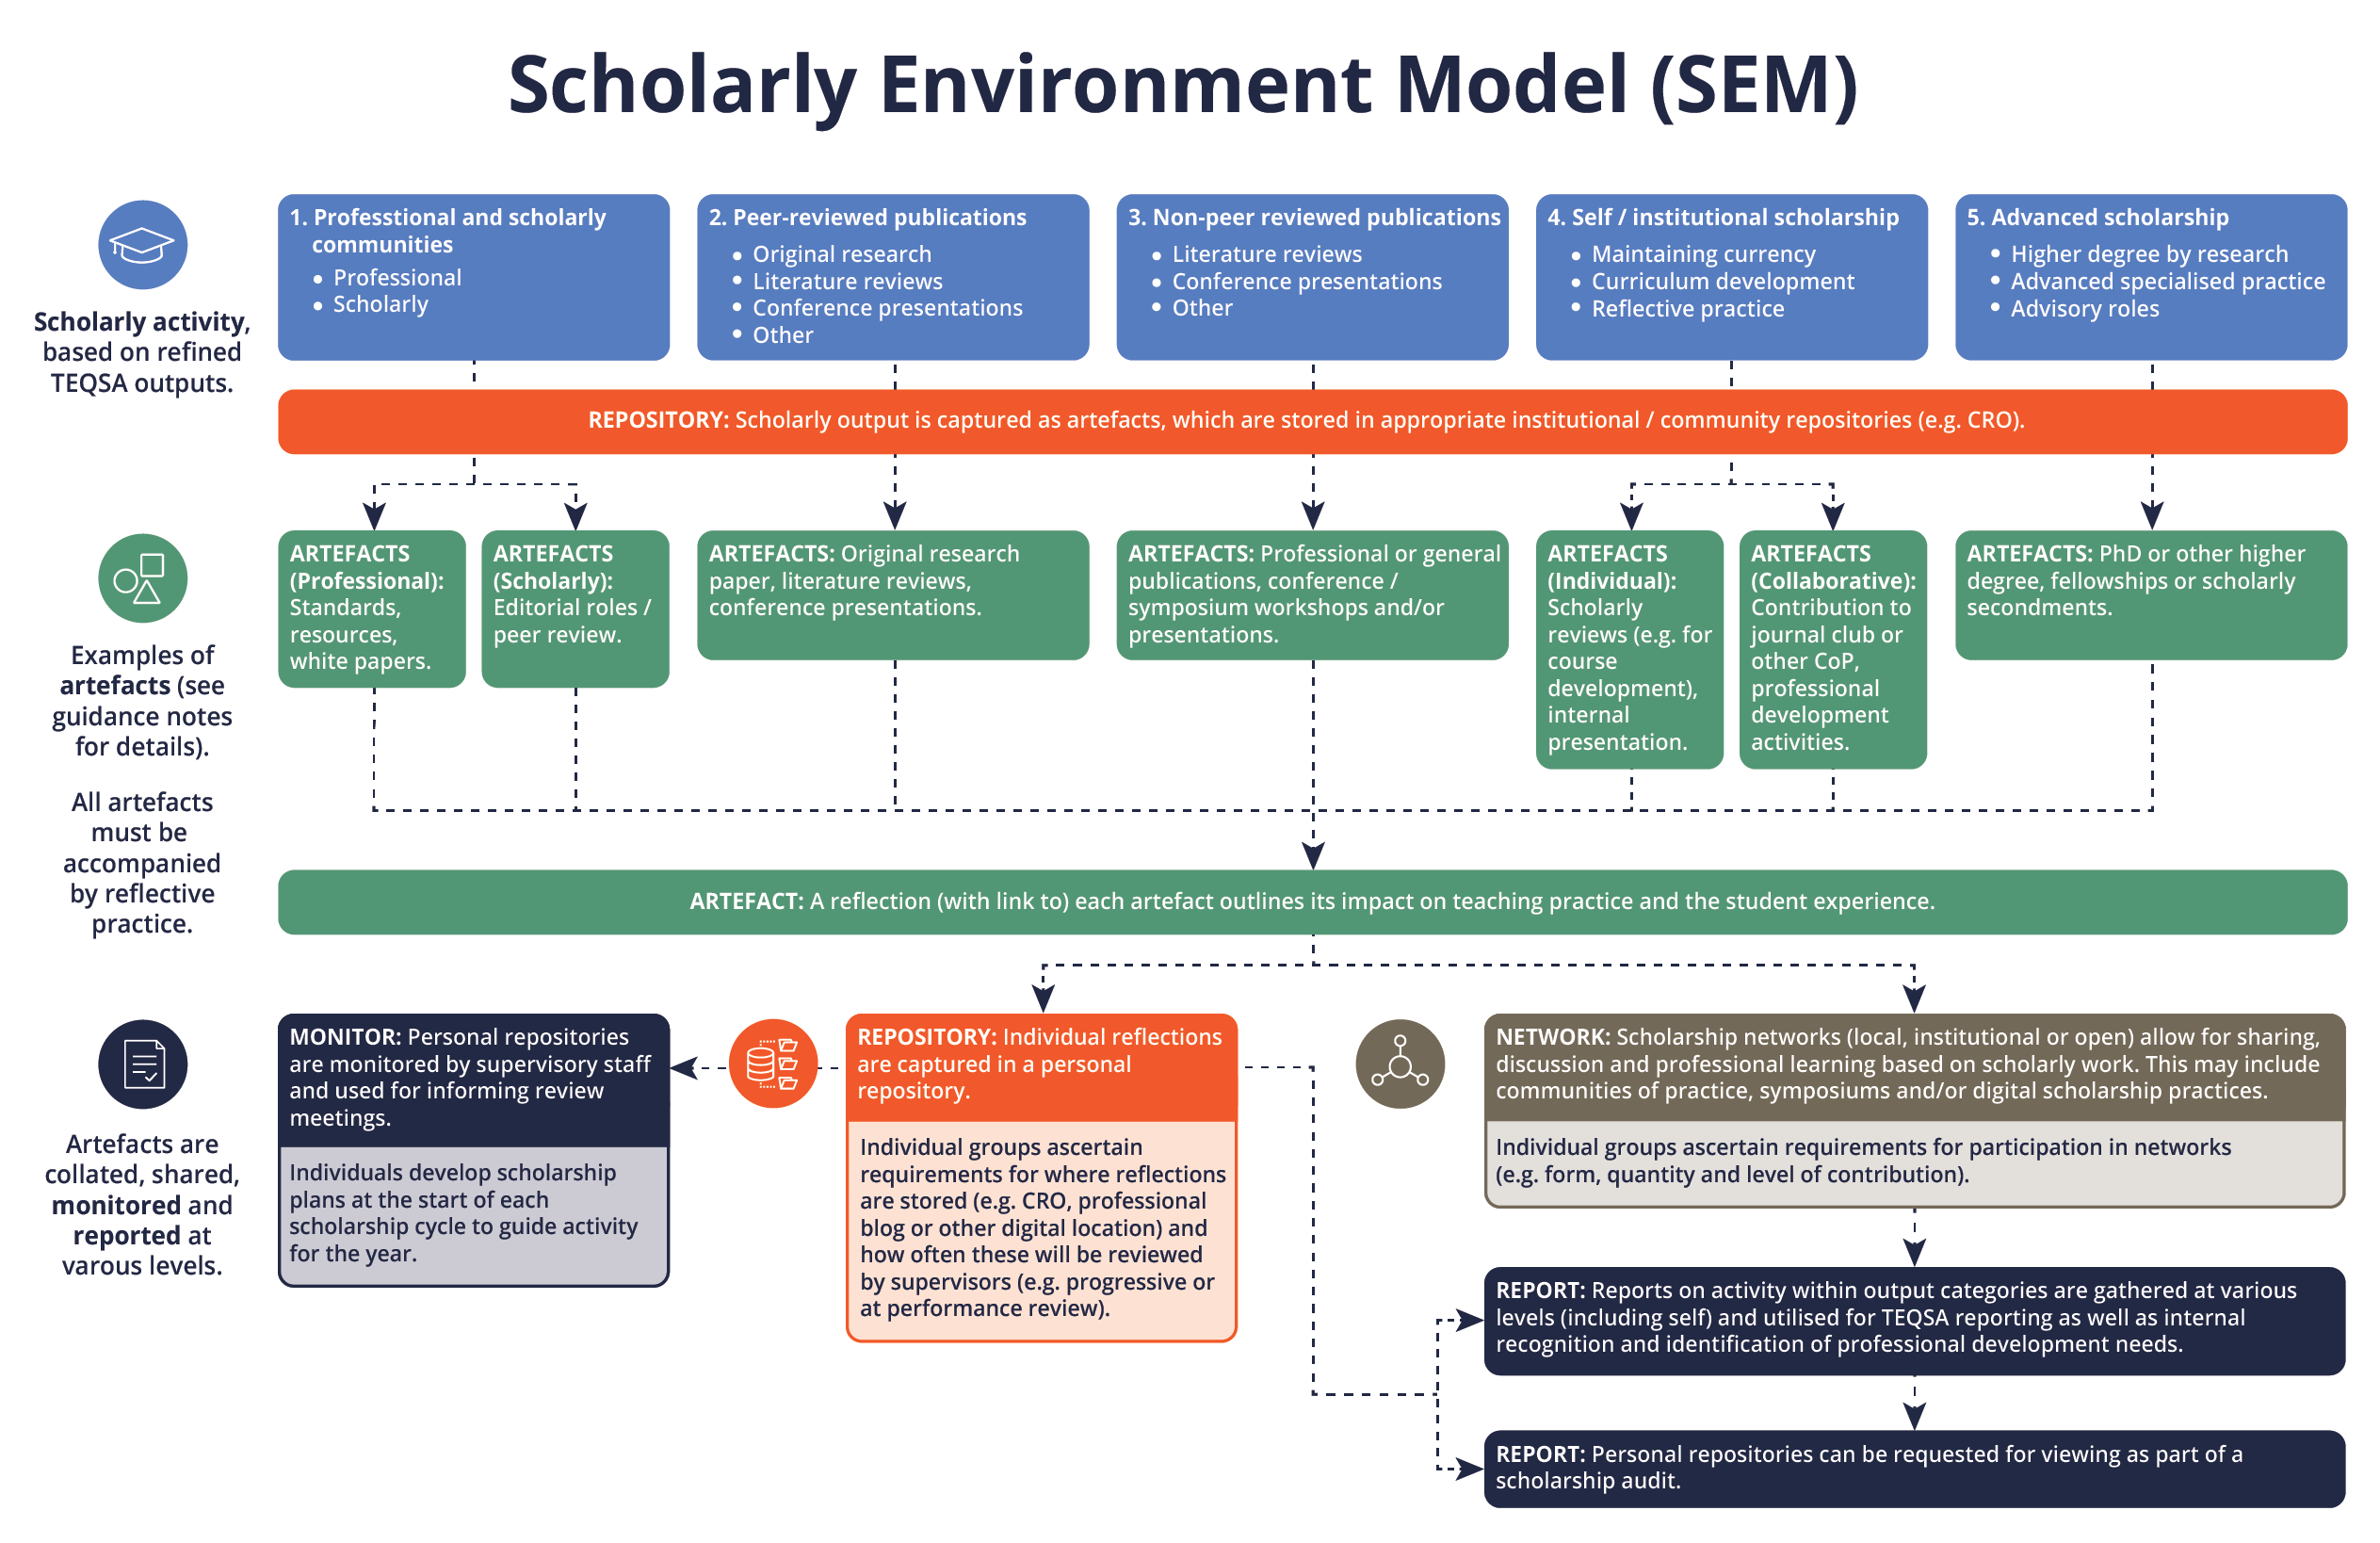 The Model has 5 activity types: Professional and scholarly communities, Peer-reviewed publications, Non-peer-reviewed publications, Advanced scholarship. Each has different artefacts.